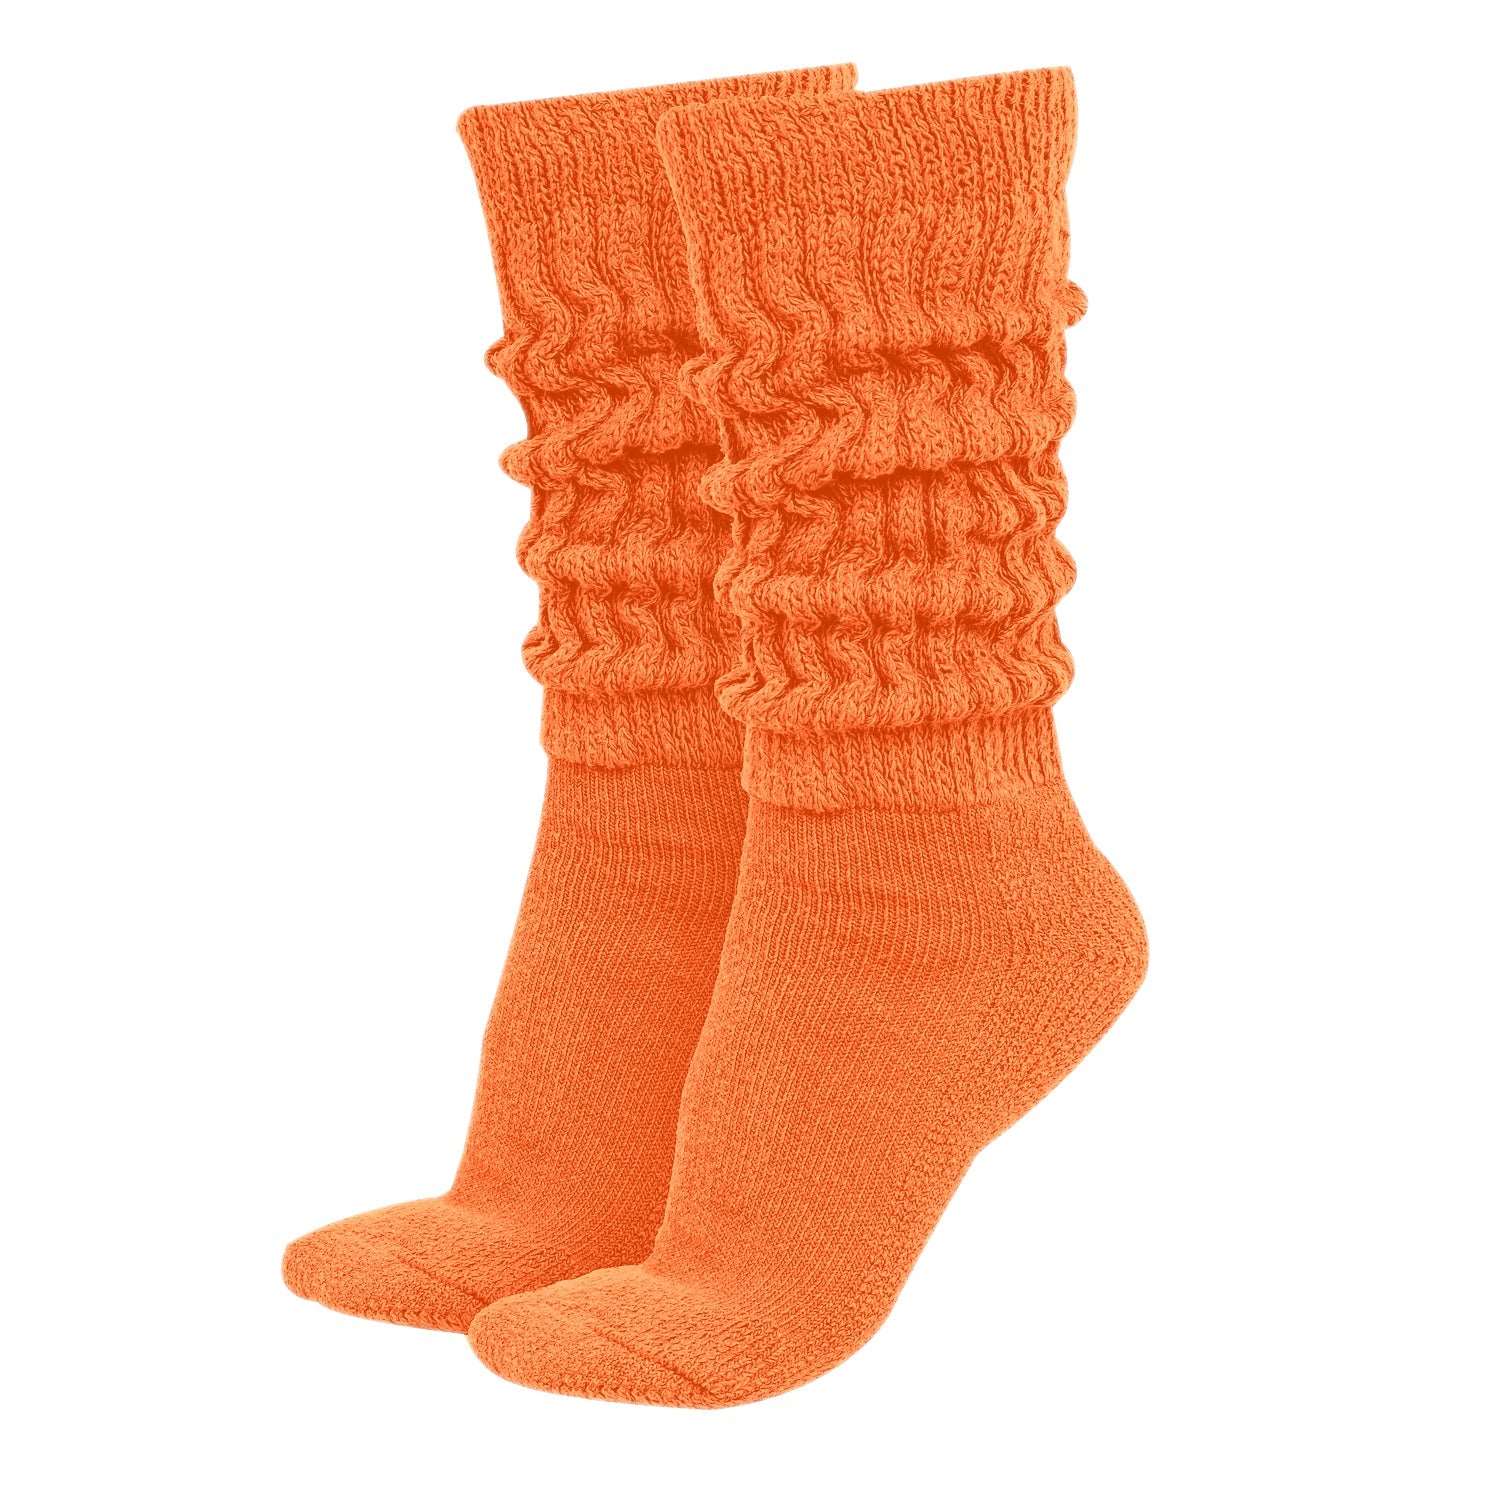 Wholesale MDR Distributors Women's Extra Long & Heavy Slouch Cotton Wear at any Length Socks Made in USA 1 Pair Size 9 to 11 Minimum Purchase 60 pieces